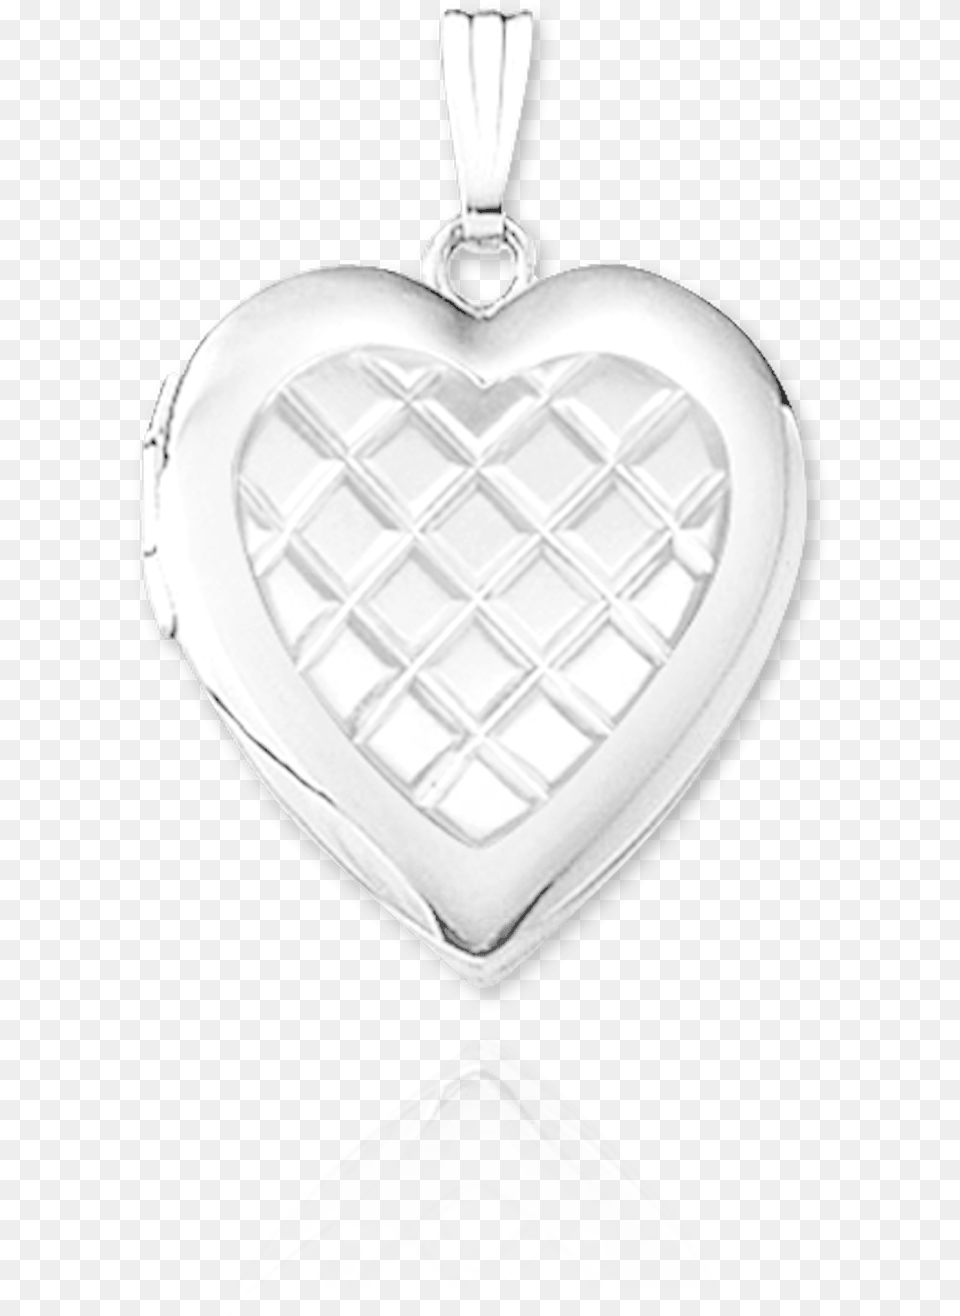 Heart Shaped Locket With Quilted Design Locket, Accessories, Pendant, Jewelry Free Transparent Png